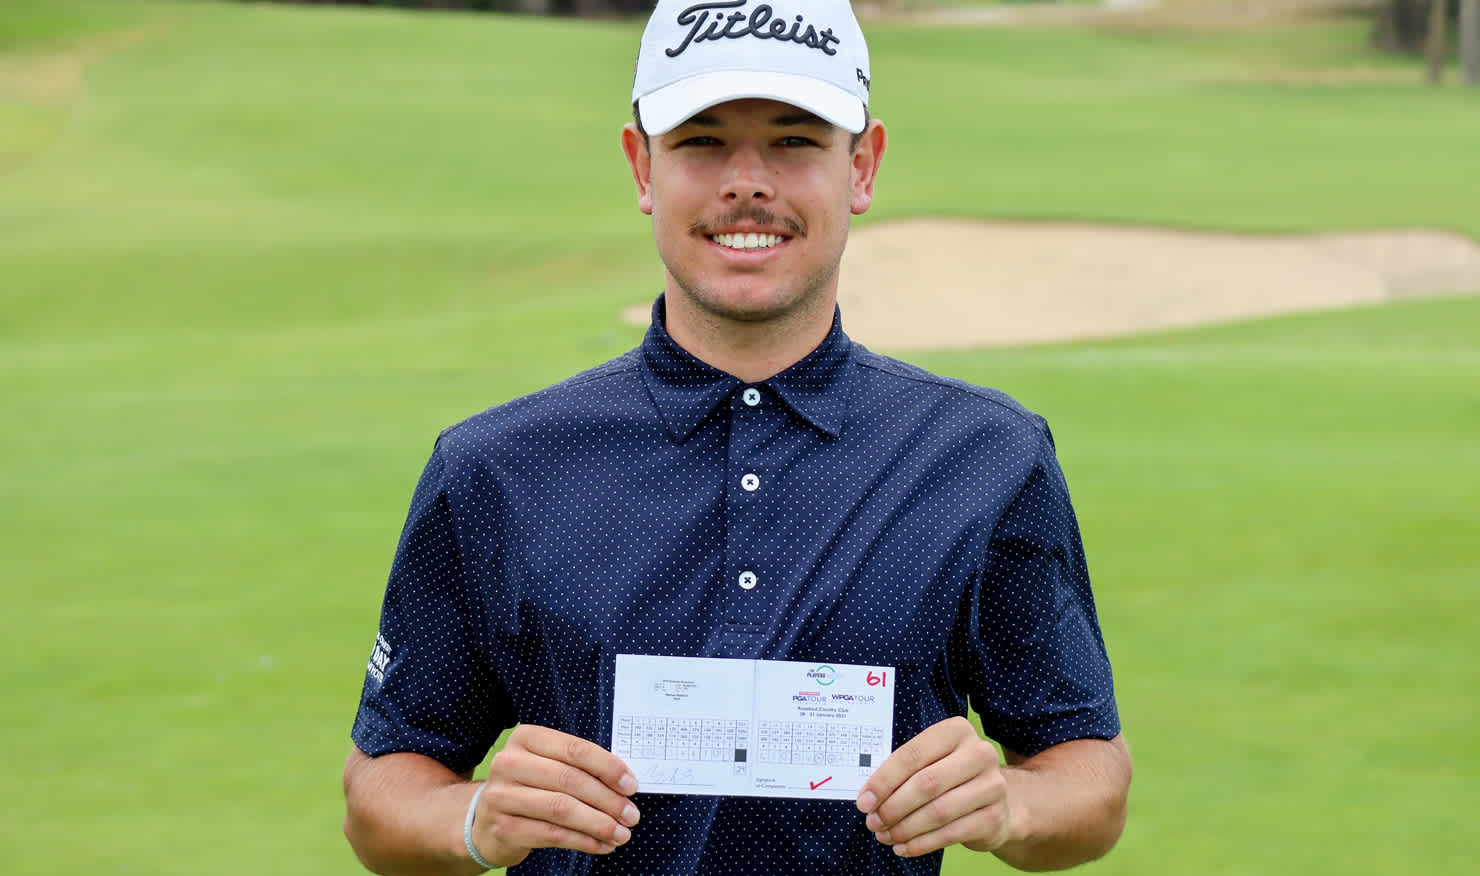 Nathan Barbieri shows off the card of his new course record at Rosebud. Picture: PGA of AUSTRALIA